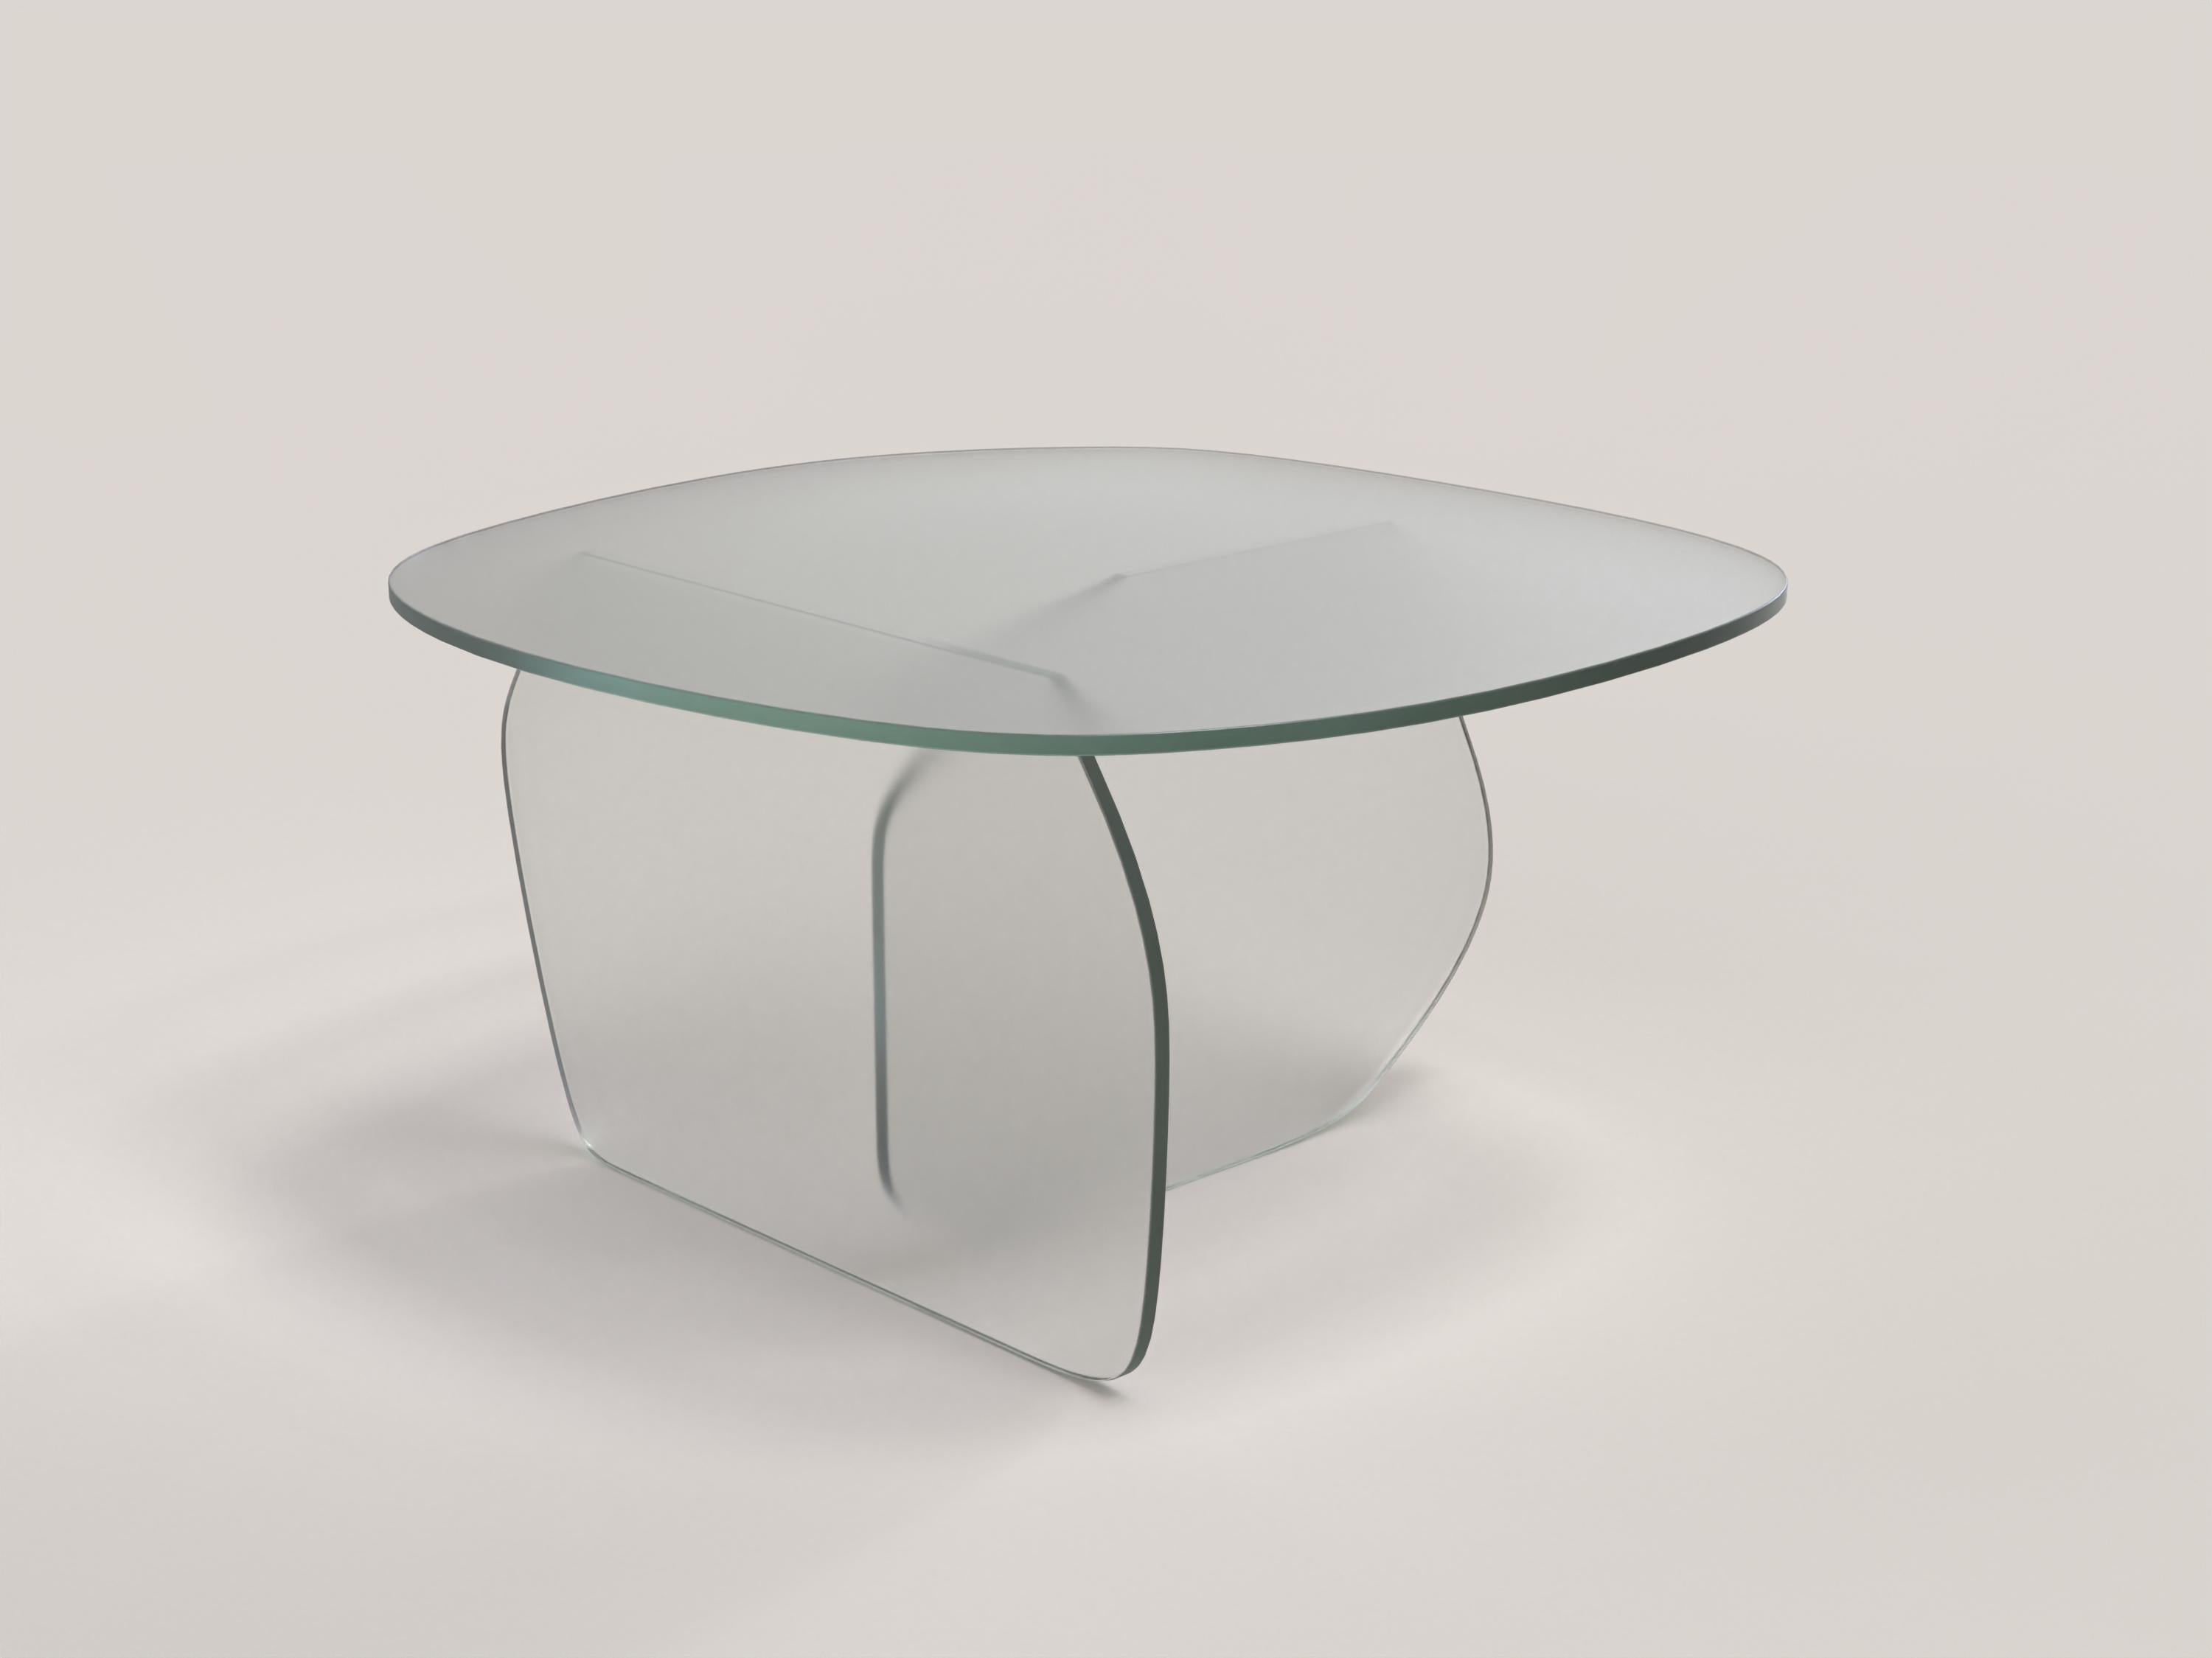 Panorama V2 is a 21st Century side table made by Italian artisans in satin clear glass. The piece is manufactured in a limited edition of 1000 signed and progressively numbered examples. It is part of the collectible design language Panorama that